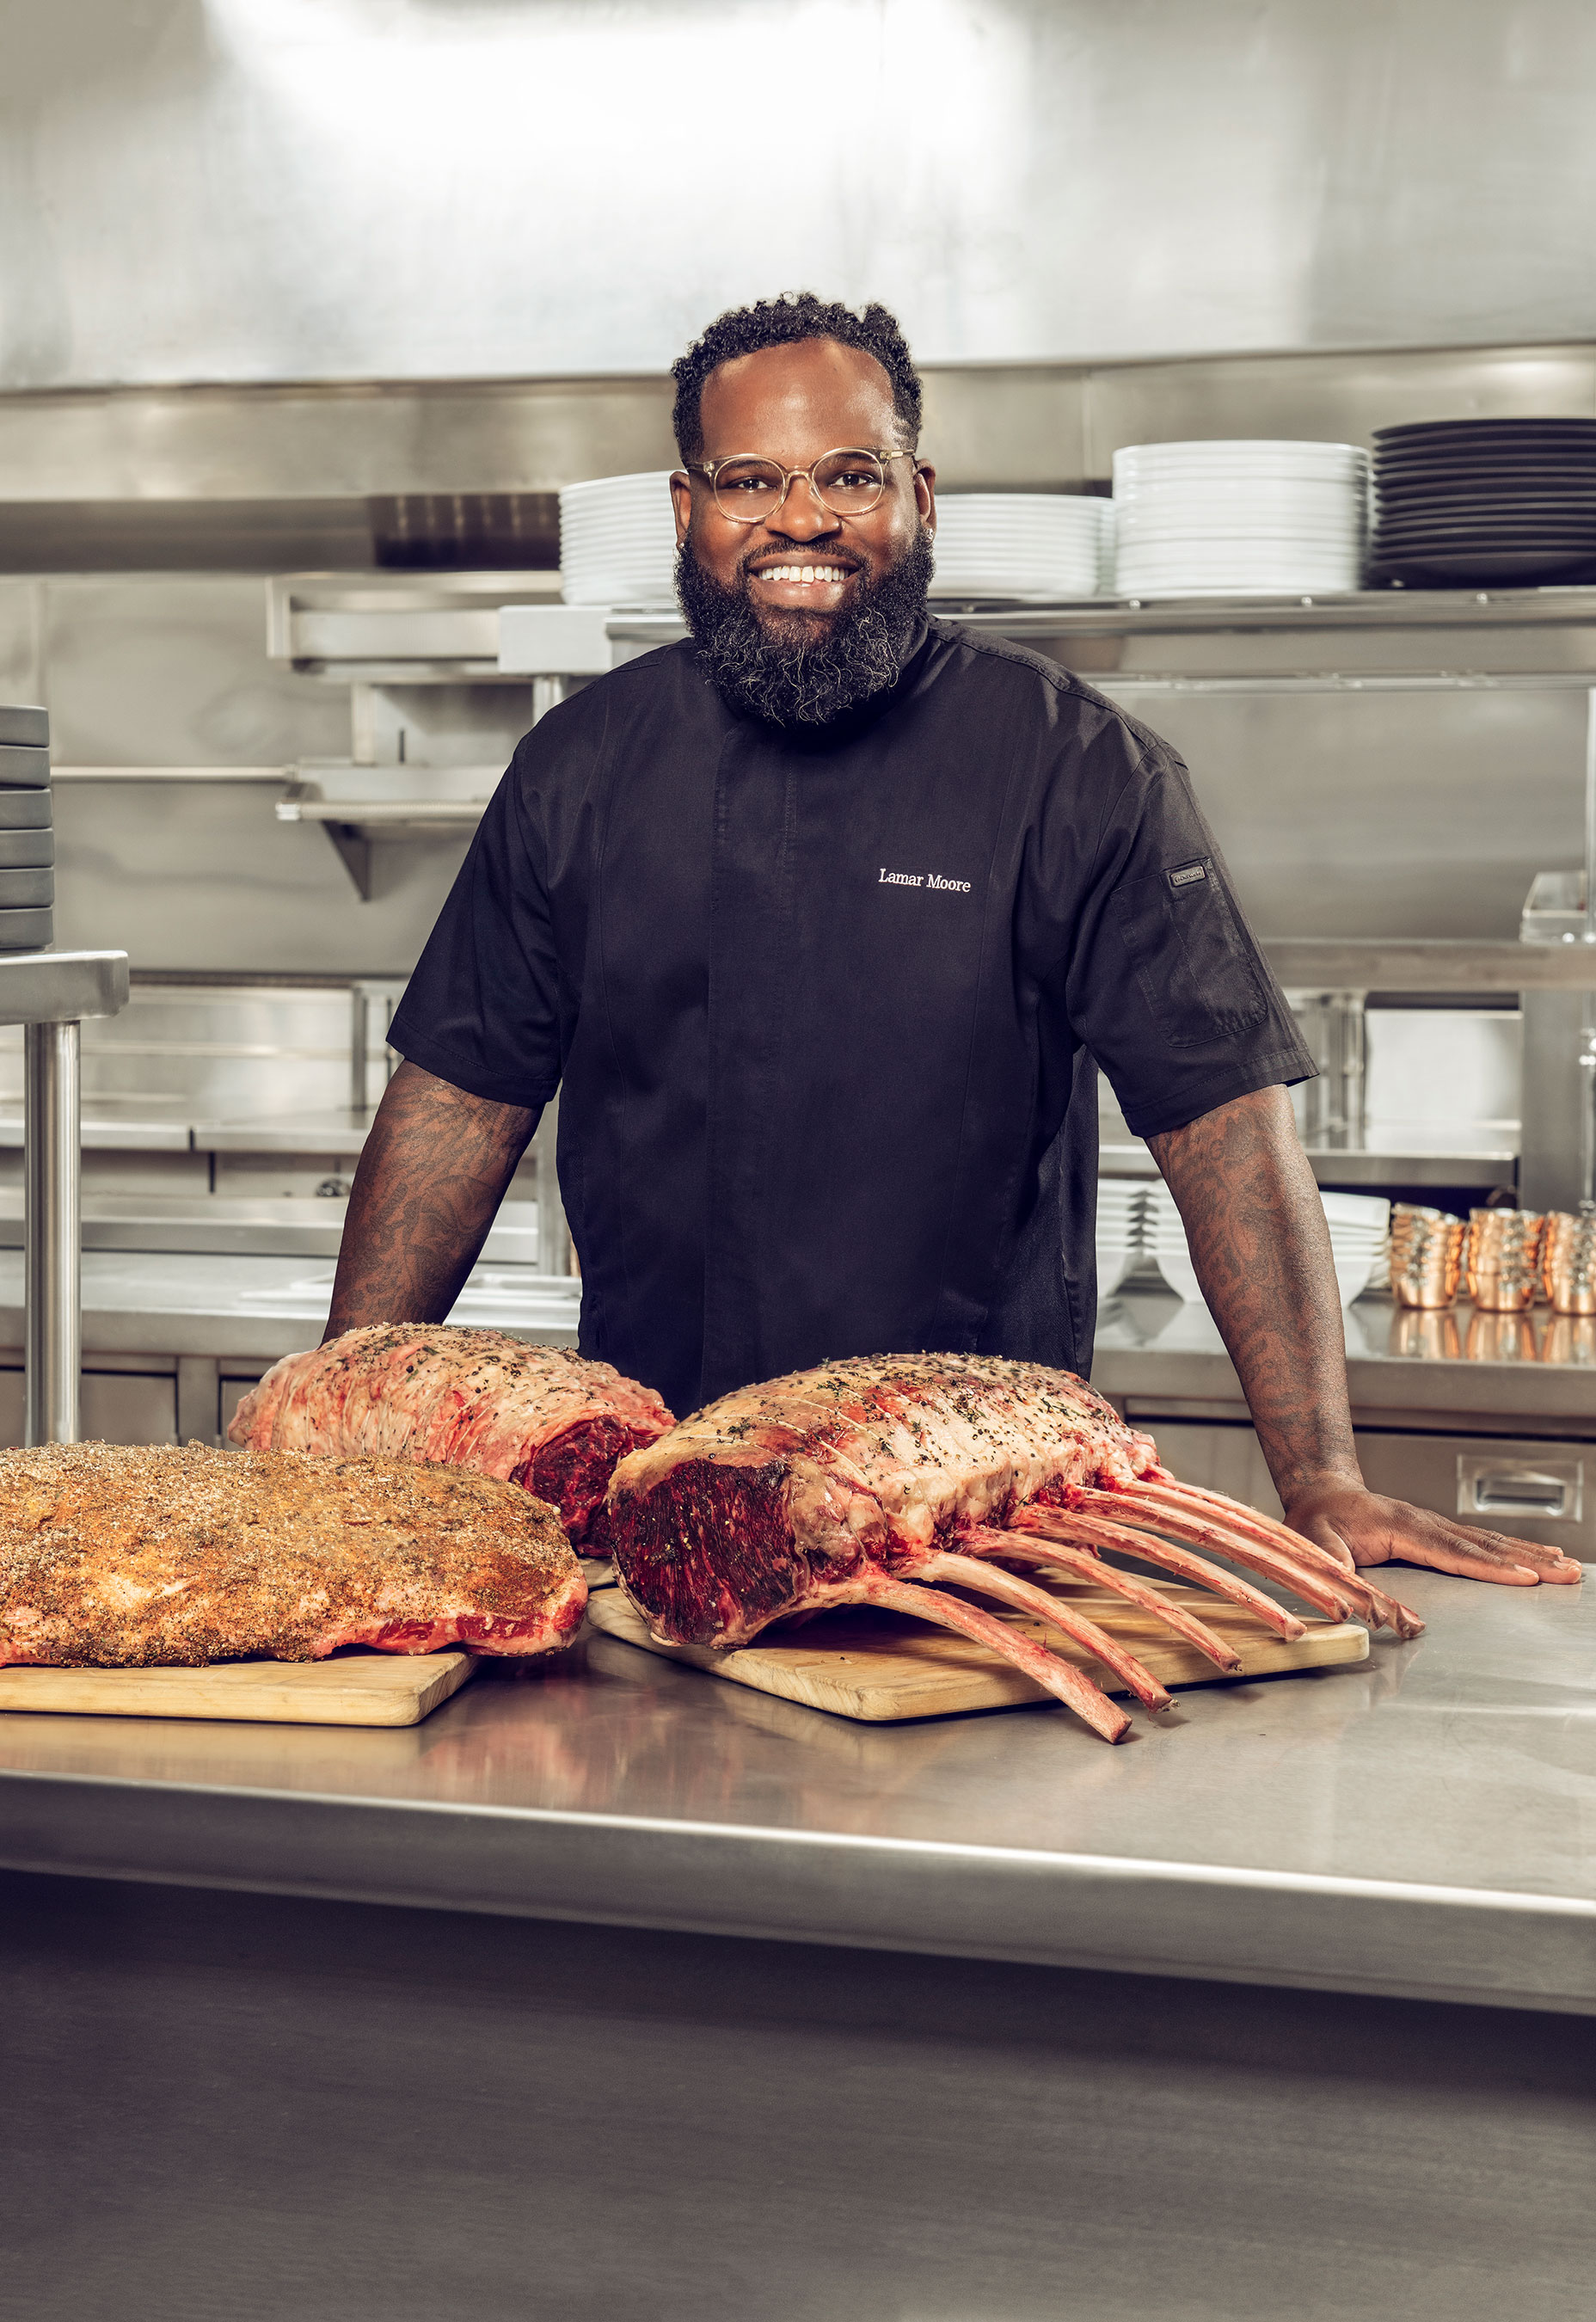 Winner of Food Network’s “Vegas Chef Prizefight” and head chef of Bugsy & Meyer’s Steakhouse, Lamar Moore